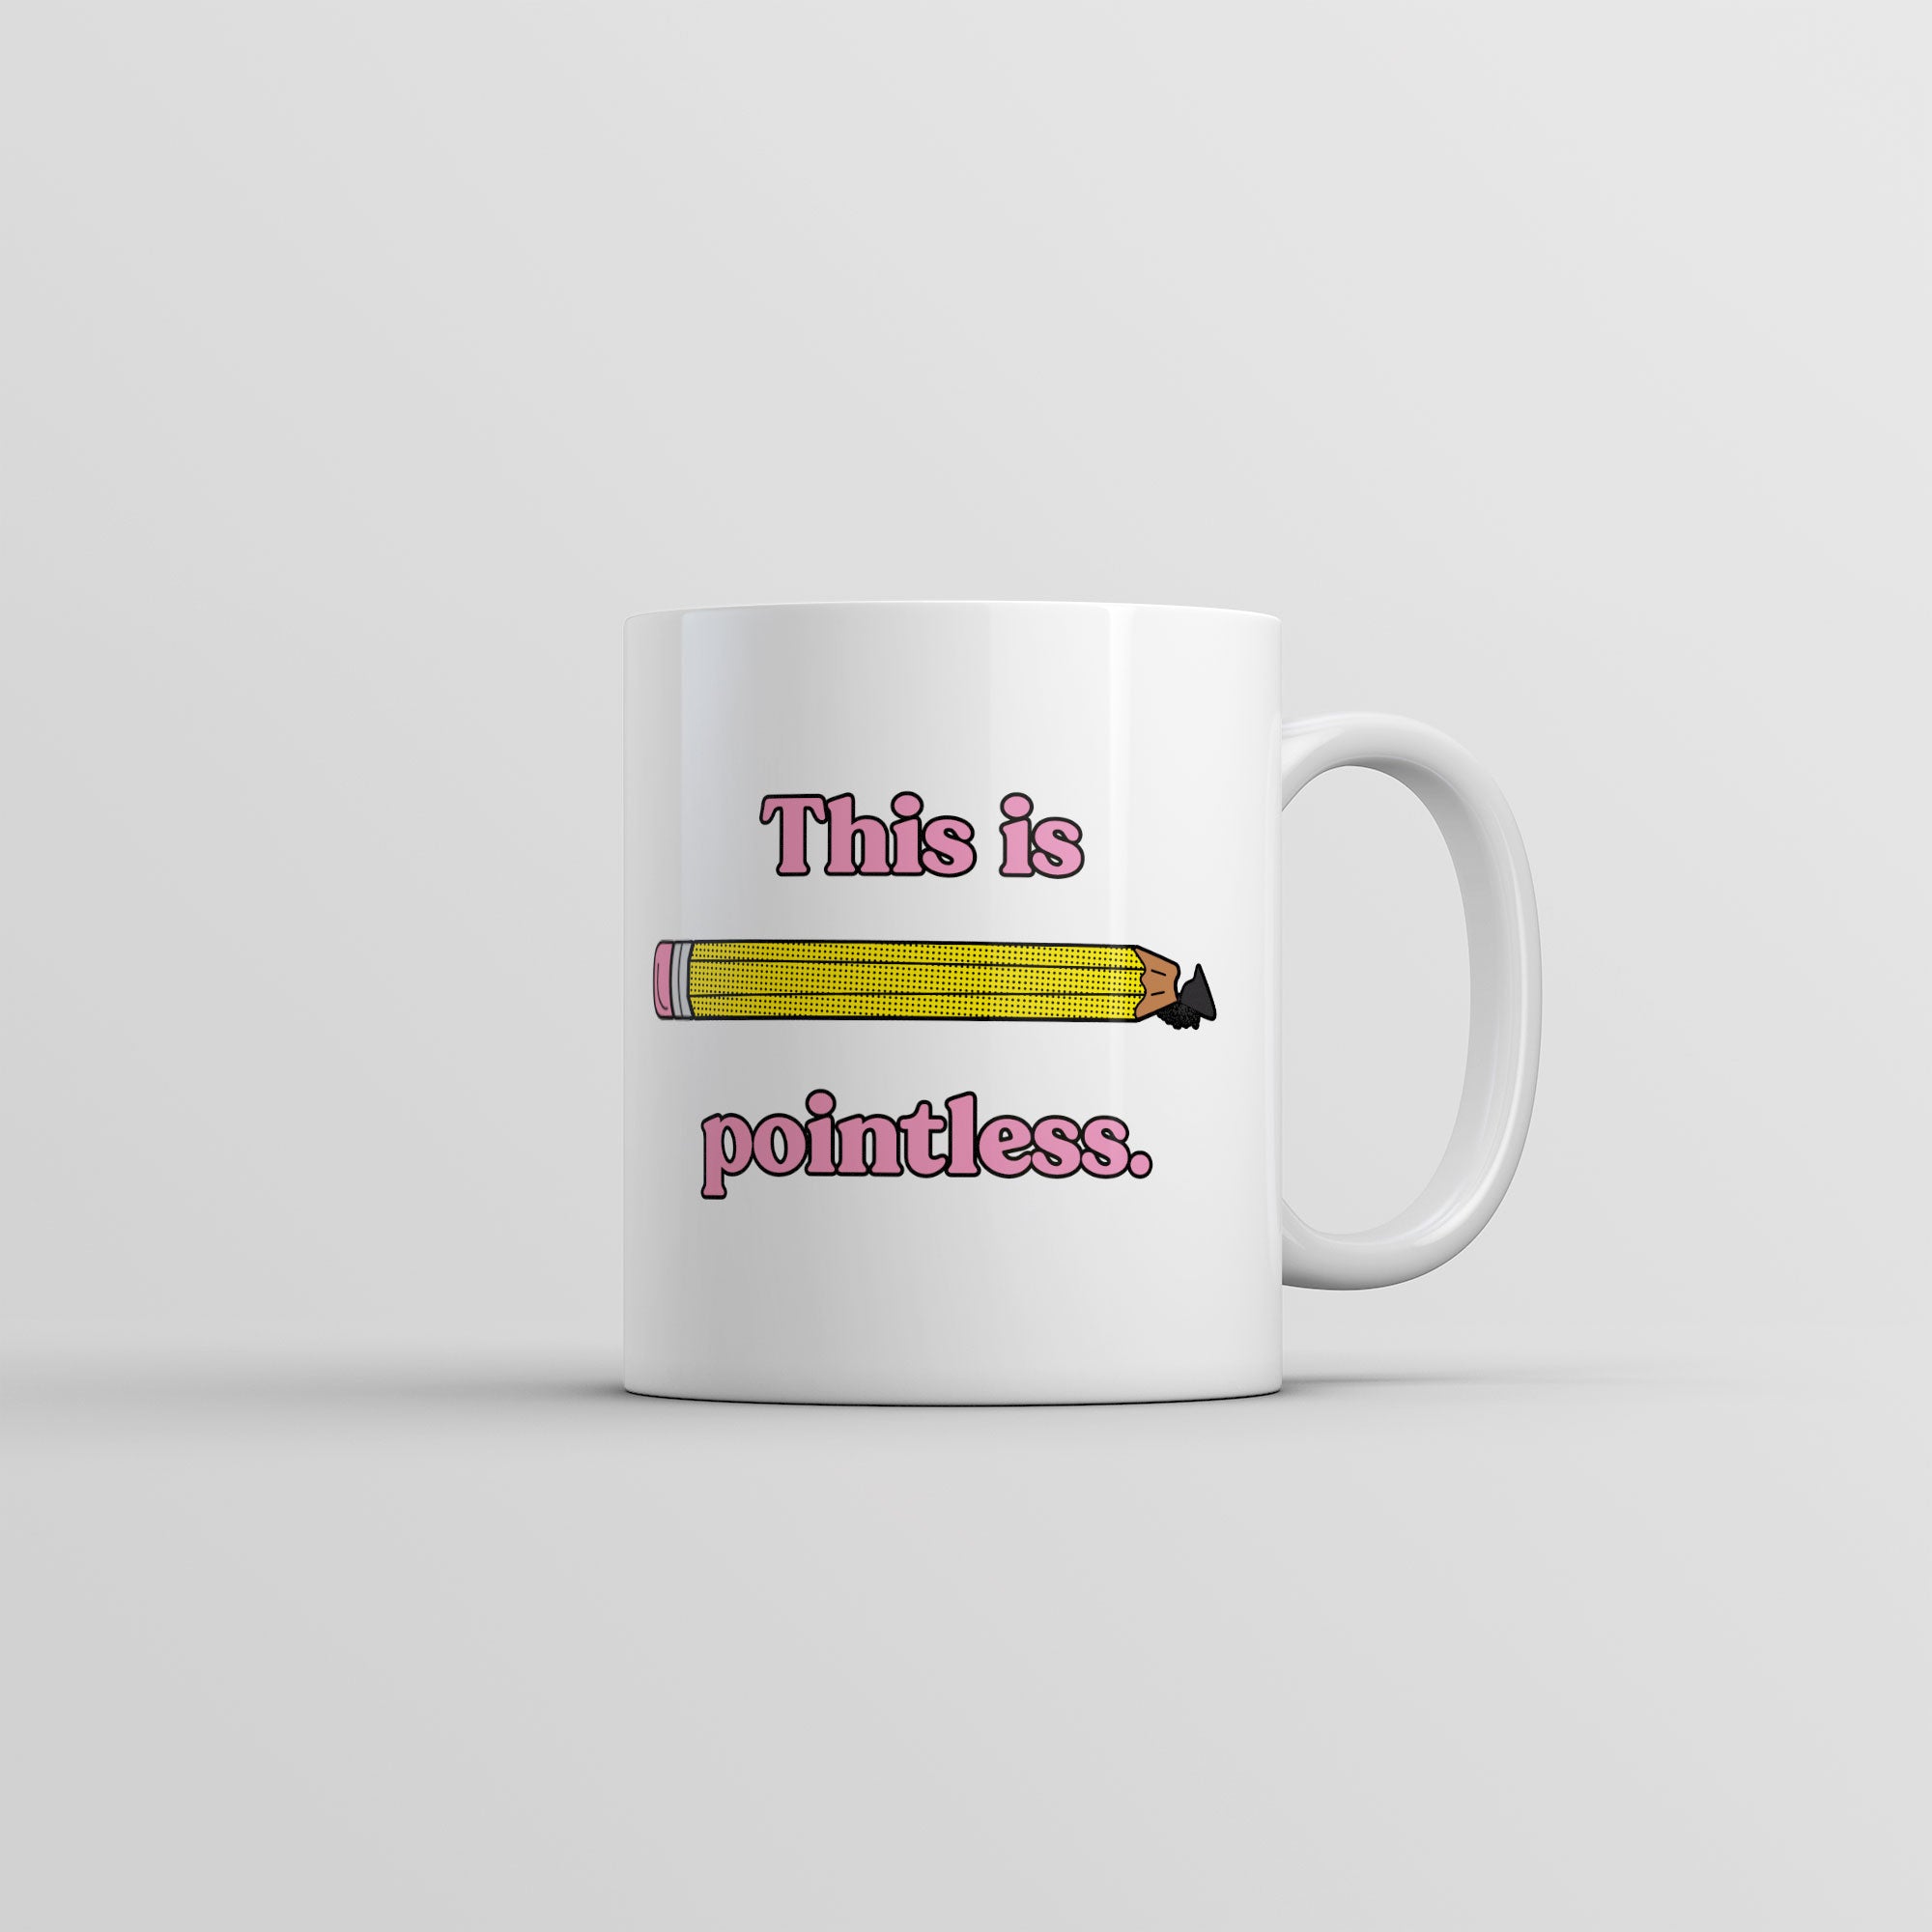 Funny White This Is Pointless Coffee Mug Nerdy sarcastic Tee